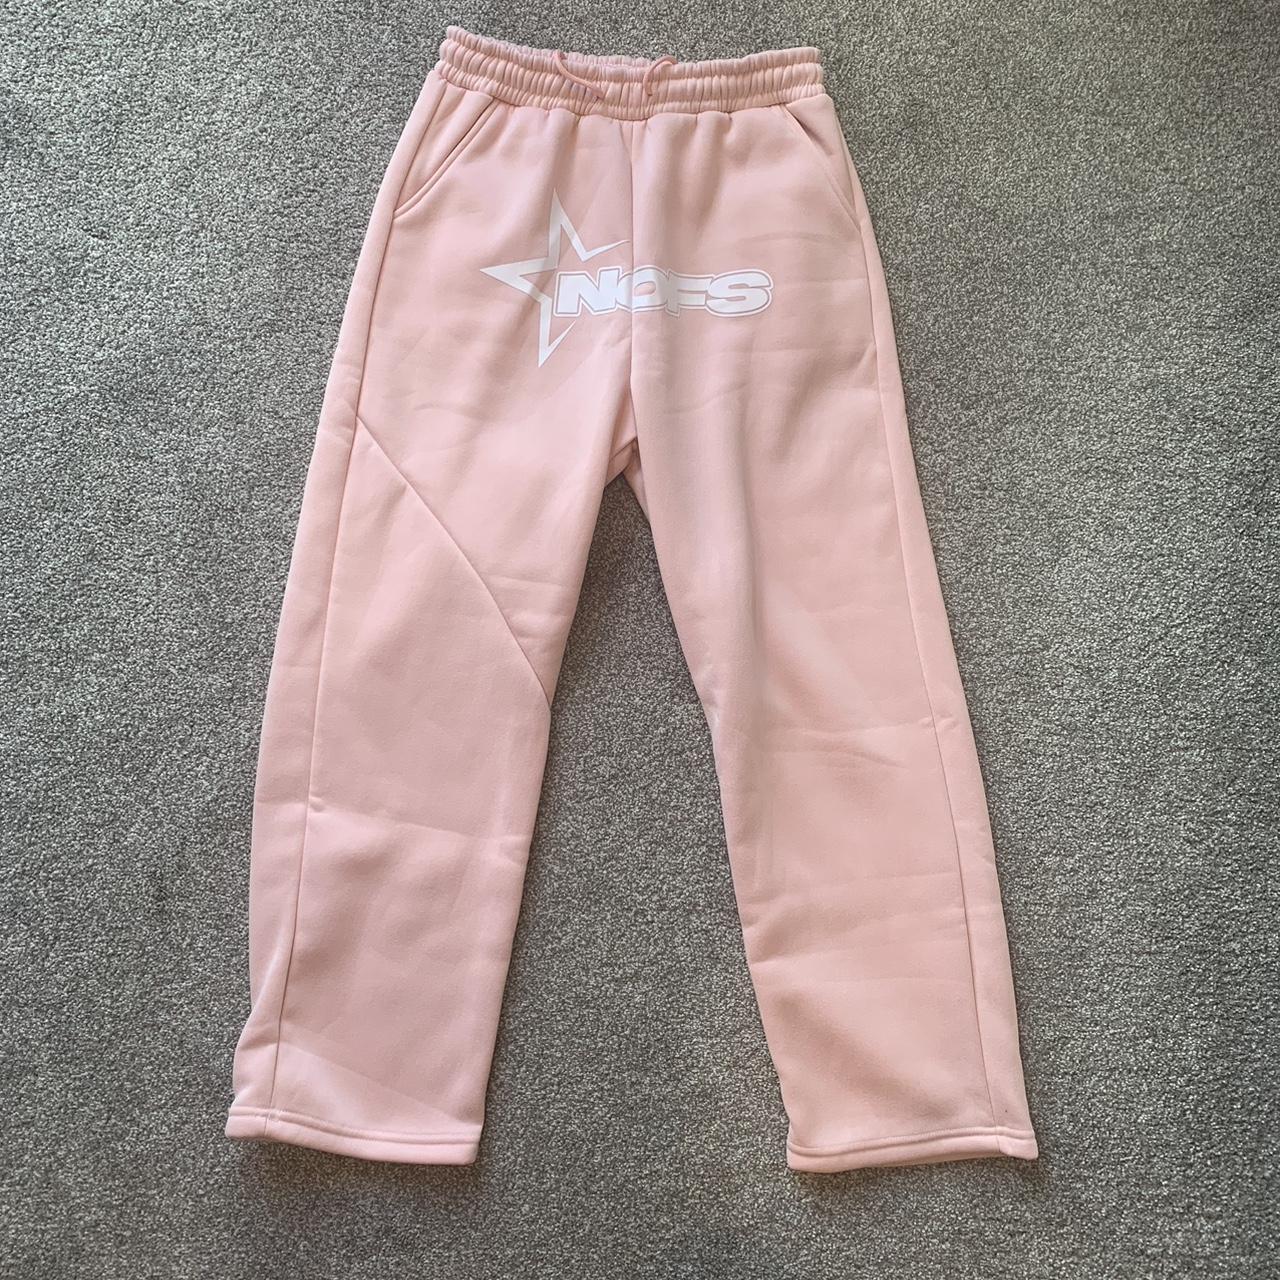 None Of Us NOFS 💫 Pink Tracksuit Joggers 💕 Size M... - Depop